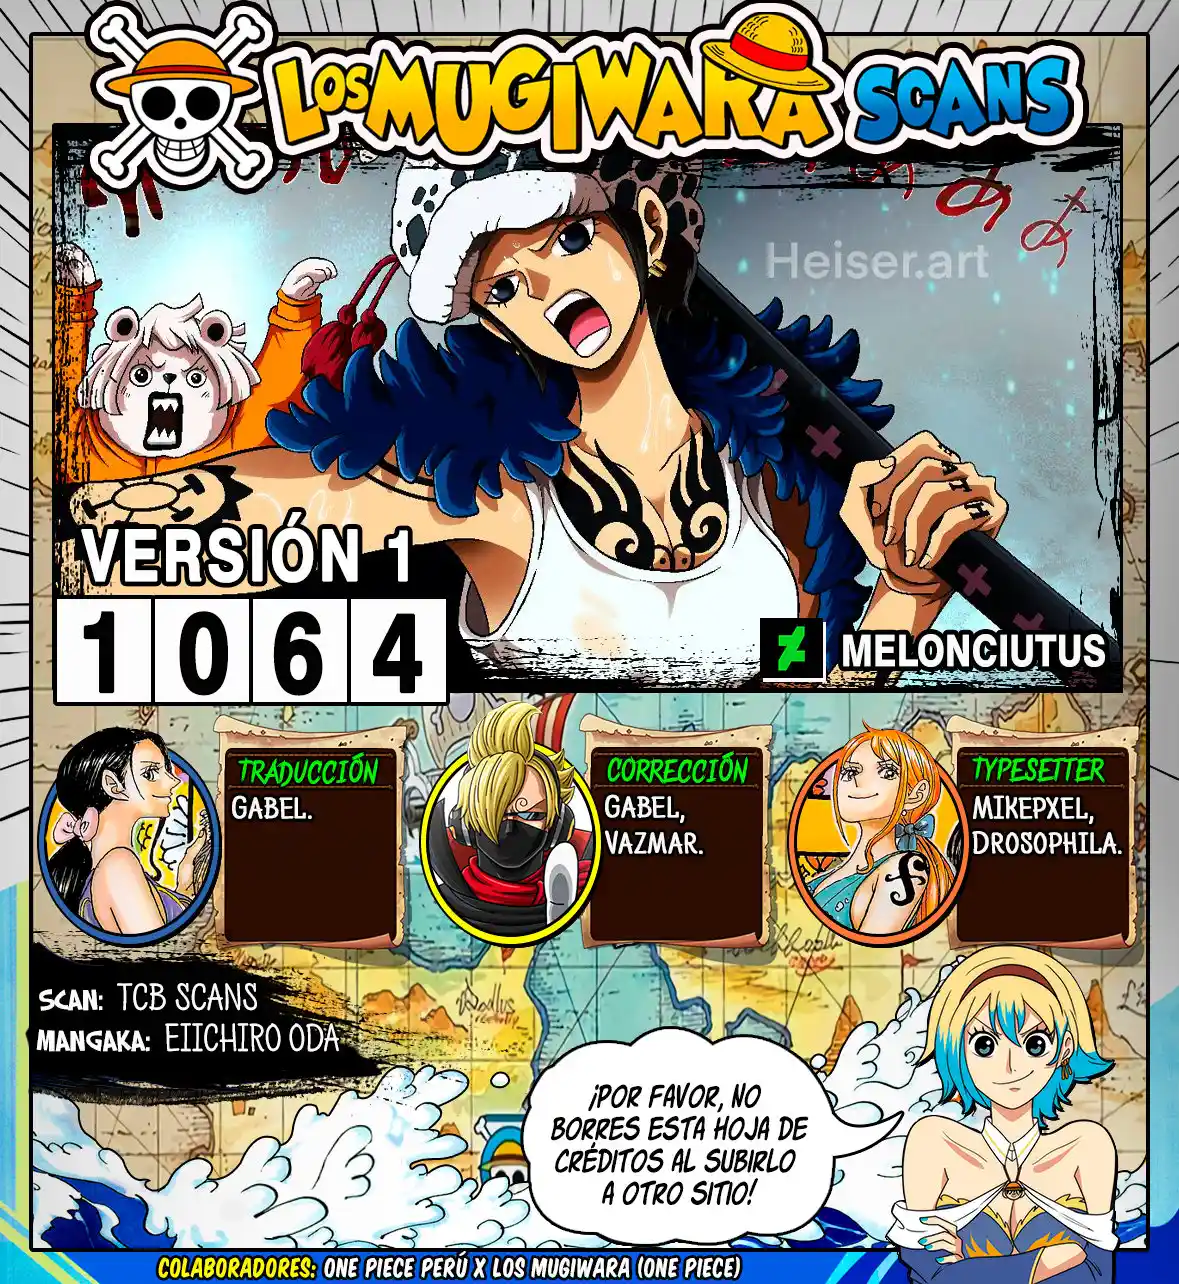 One Piece: Chapter 1064 - Page 1